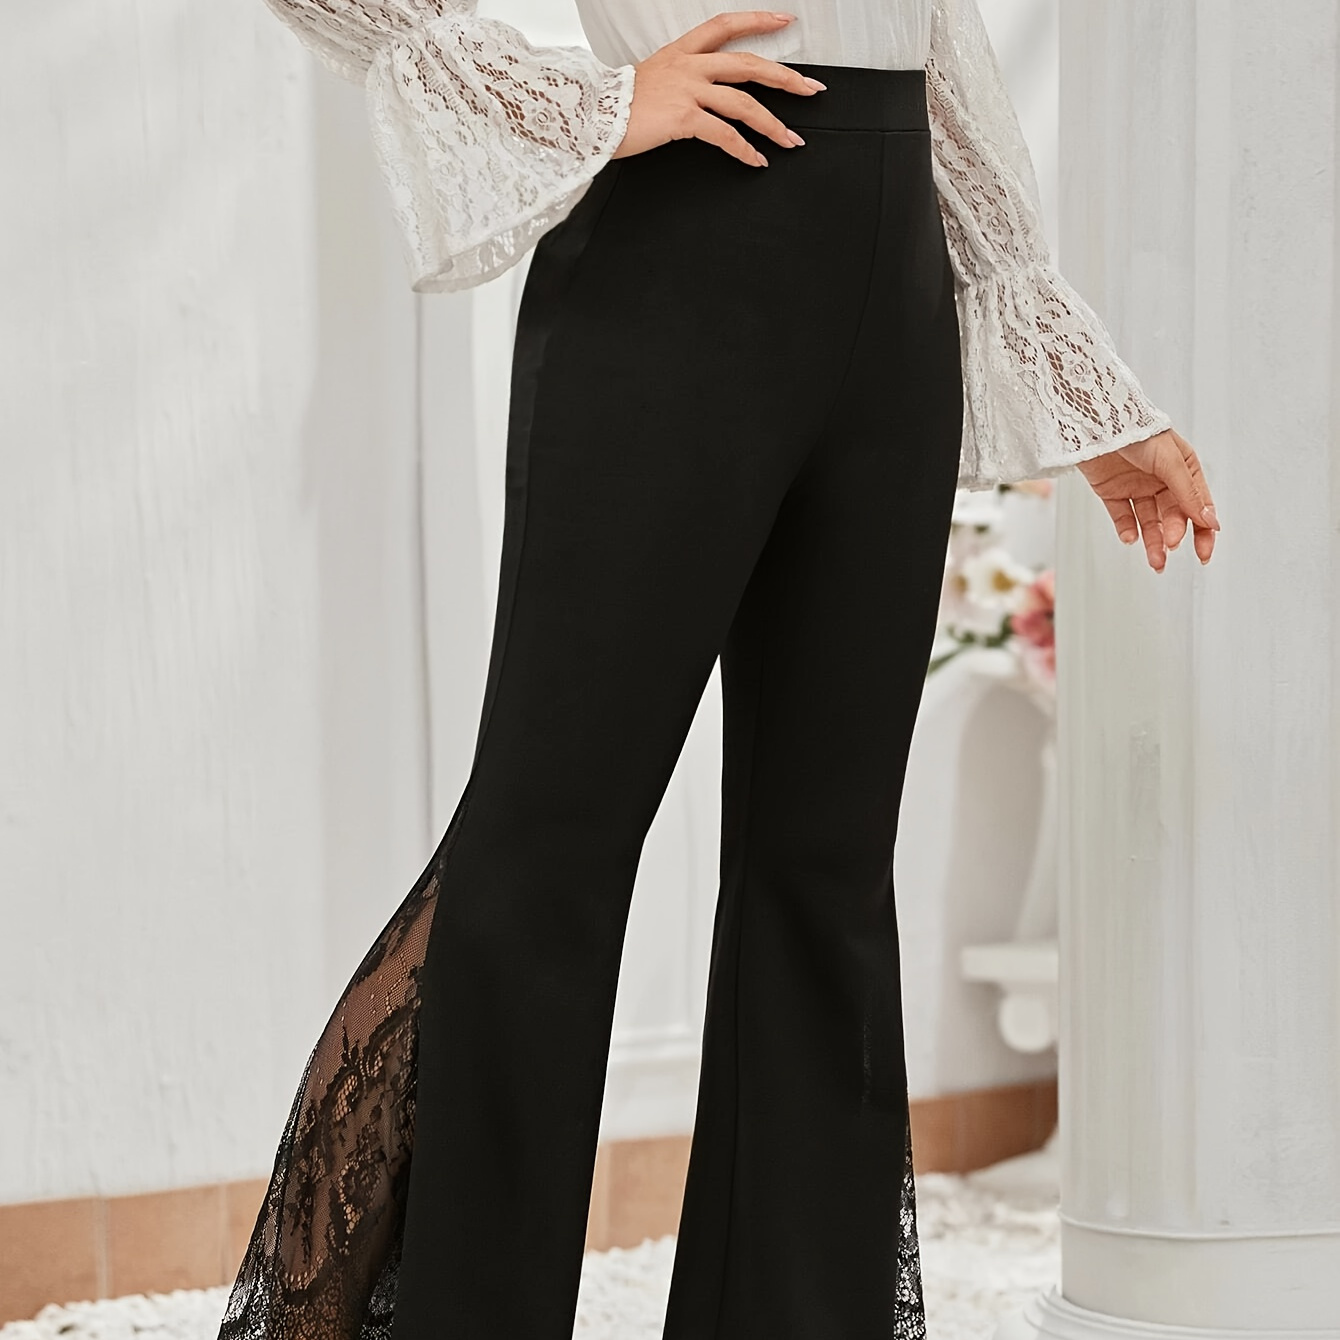 

Contrast Lace Flare Leg Pants, Elegant High Waist Forbidden Pants For Spring & Summer, Women's Clothing